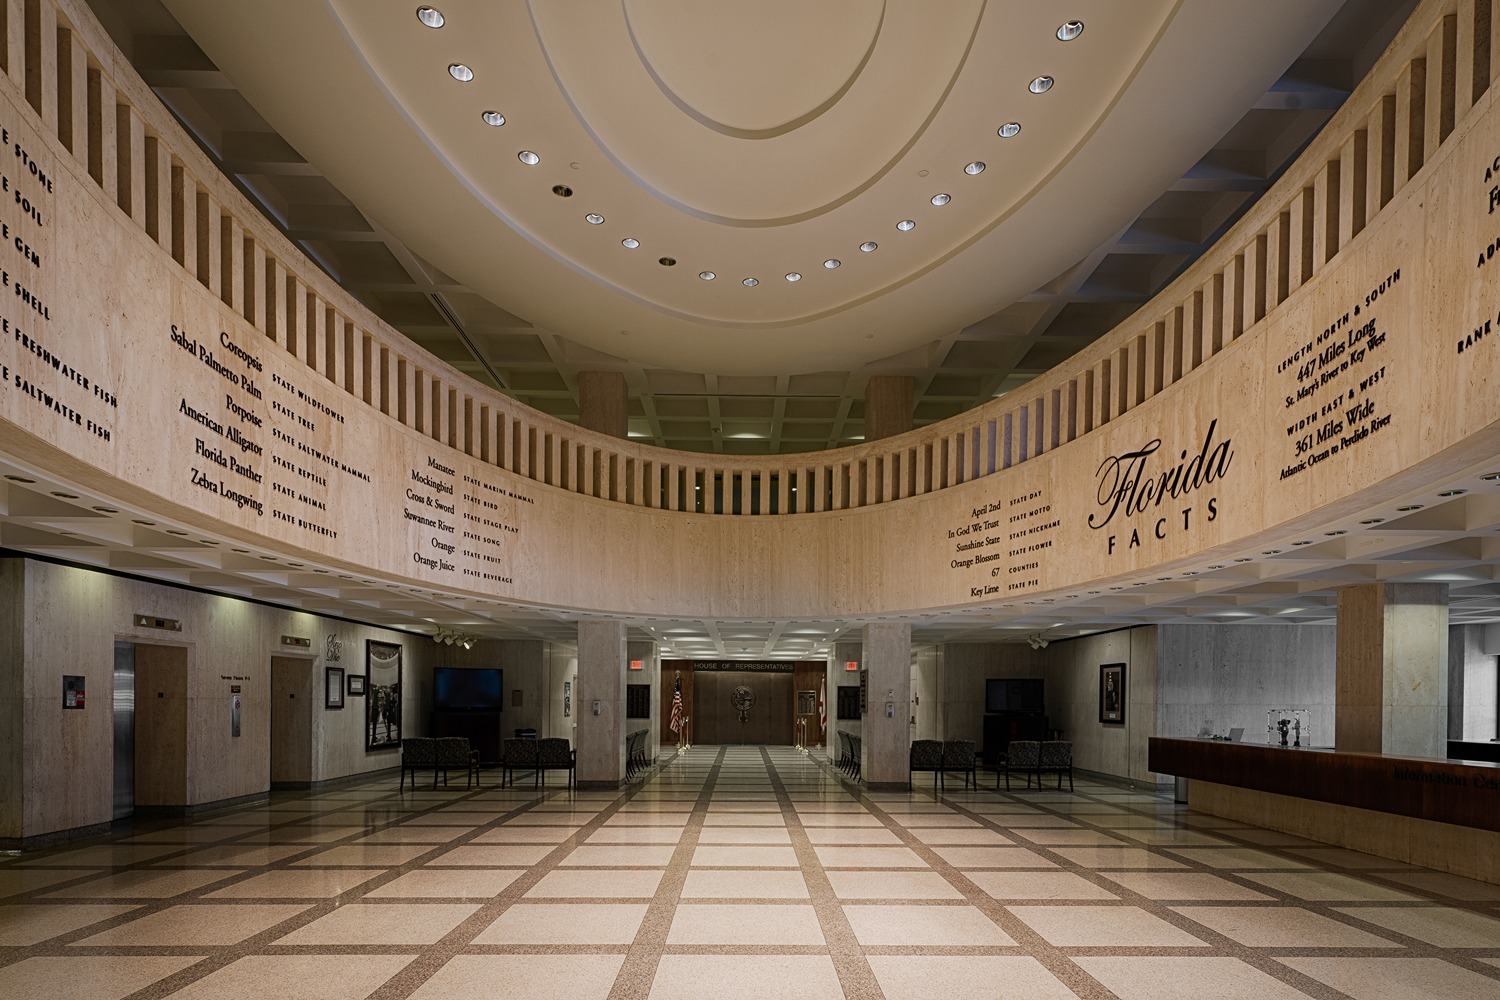 Spacious lobby with “Florida facts” engraved on the wall under a circular ceiling